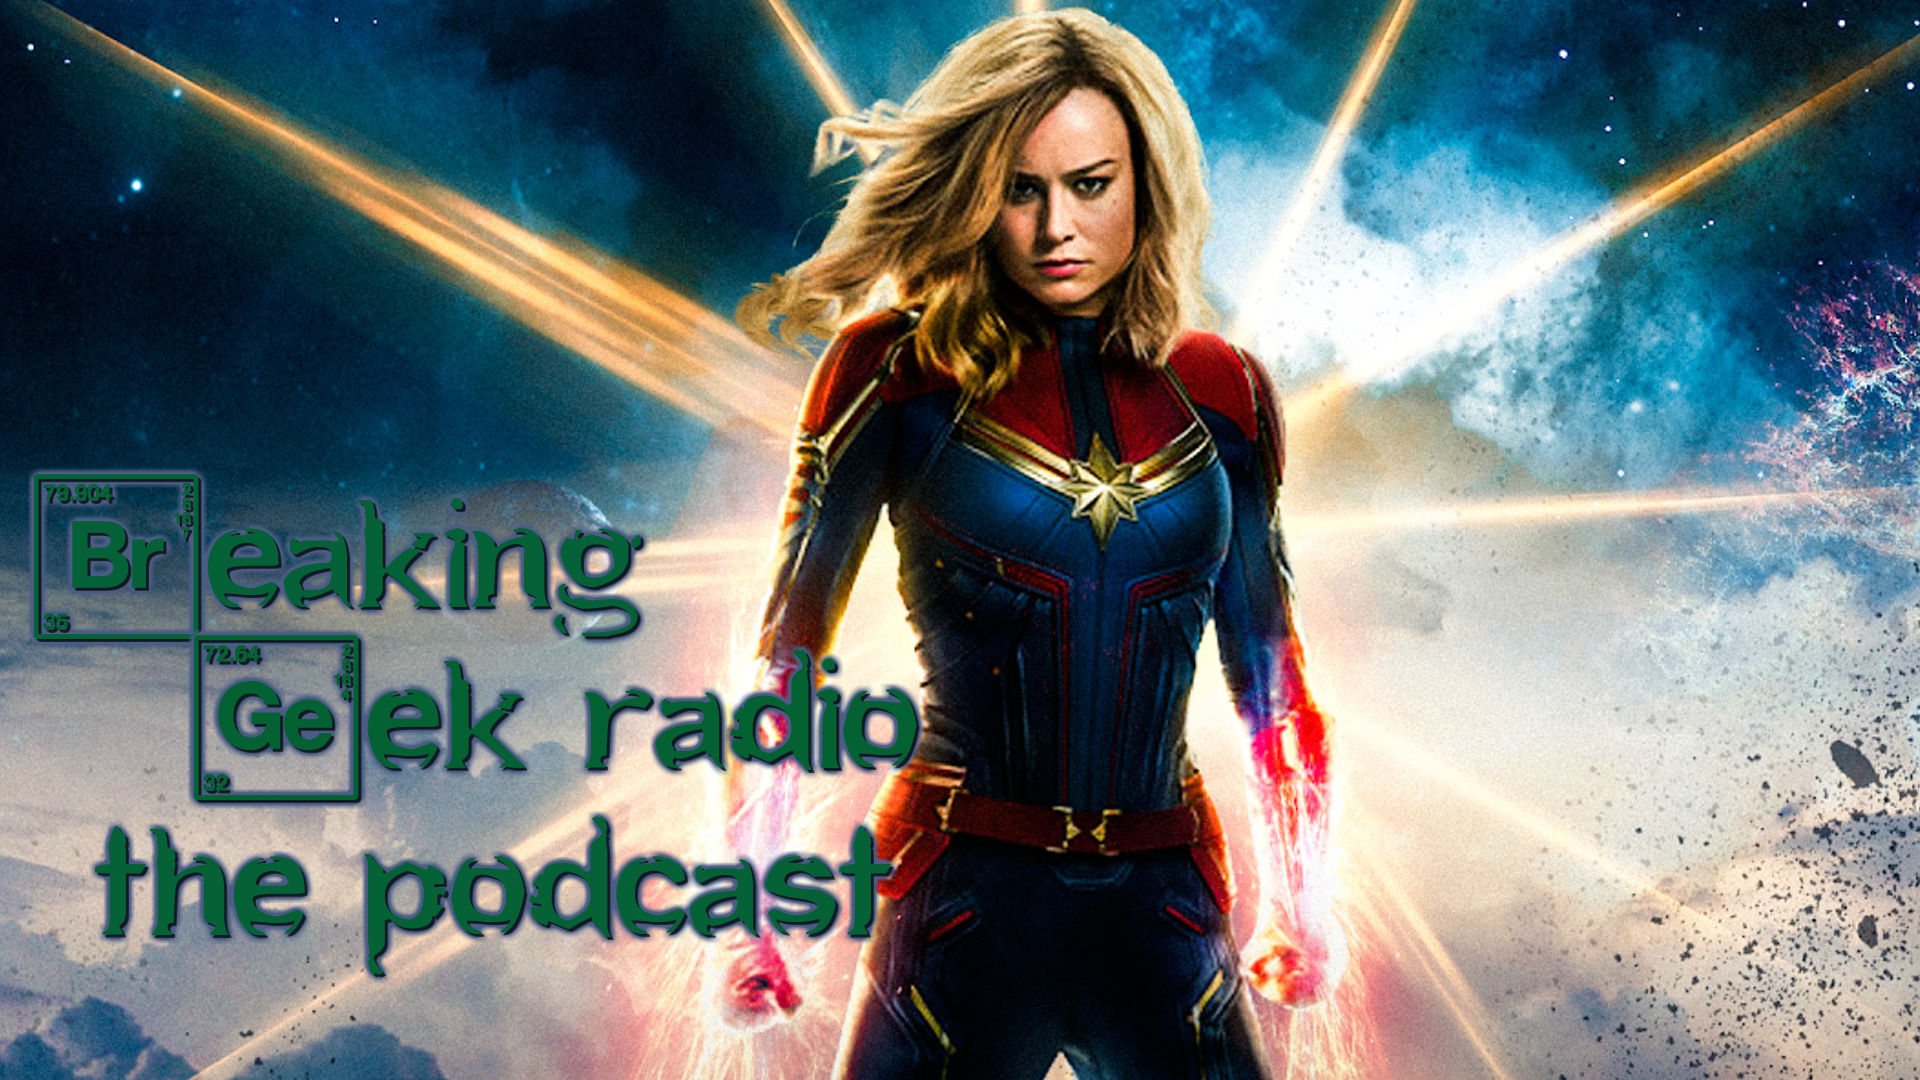 Captain Marvel SPOILER Filled Review! Where Is All the Pre-Release Hate Coming From? | Breaking Geek Radio: The Podcast